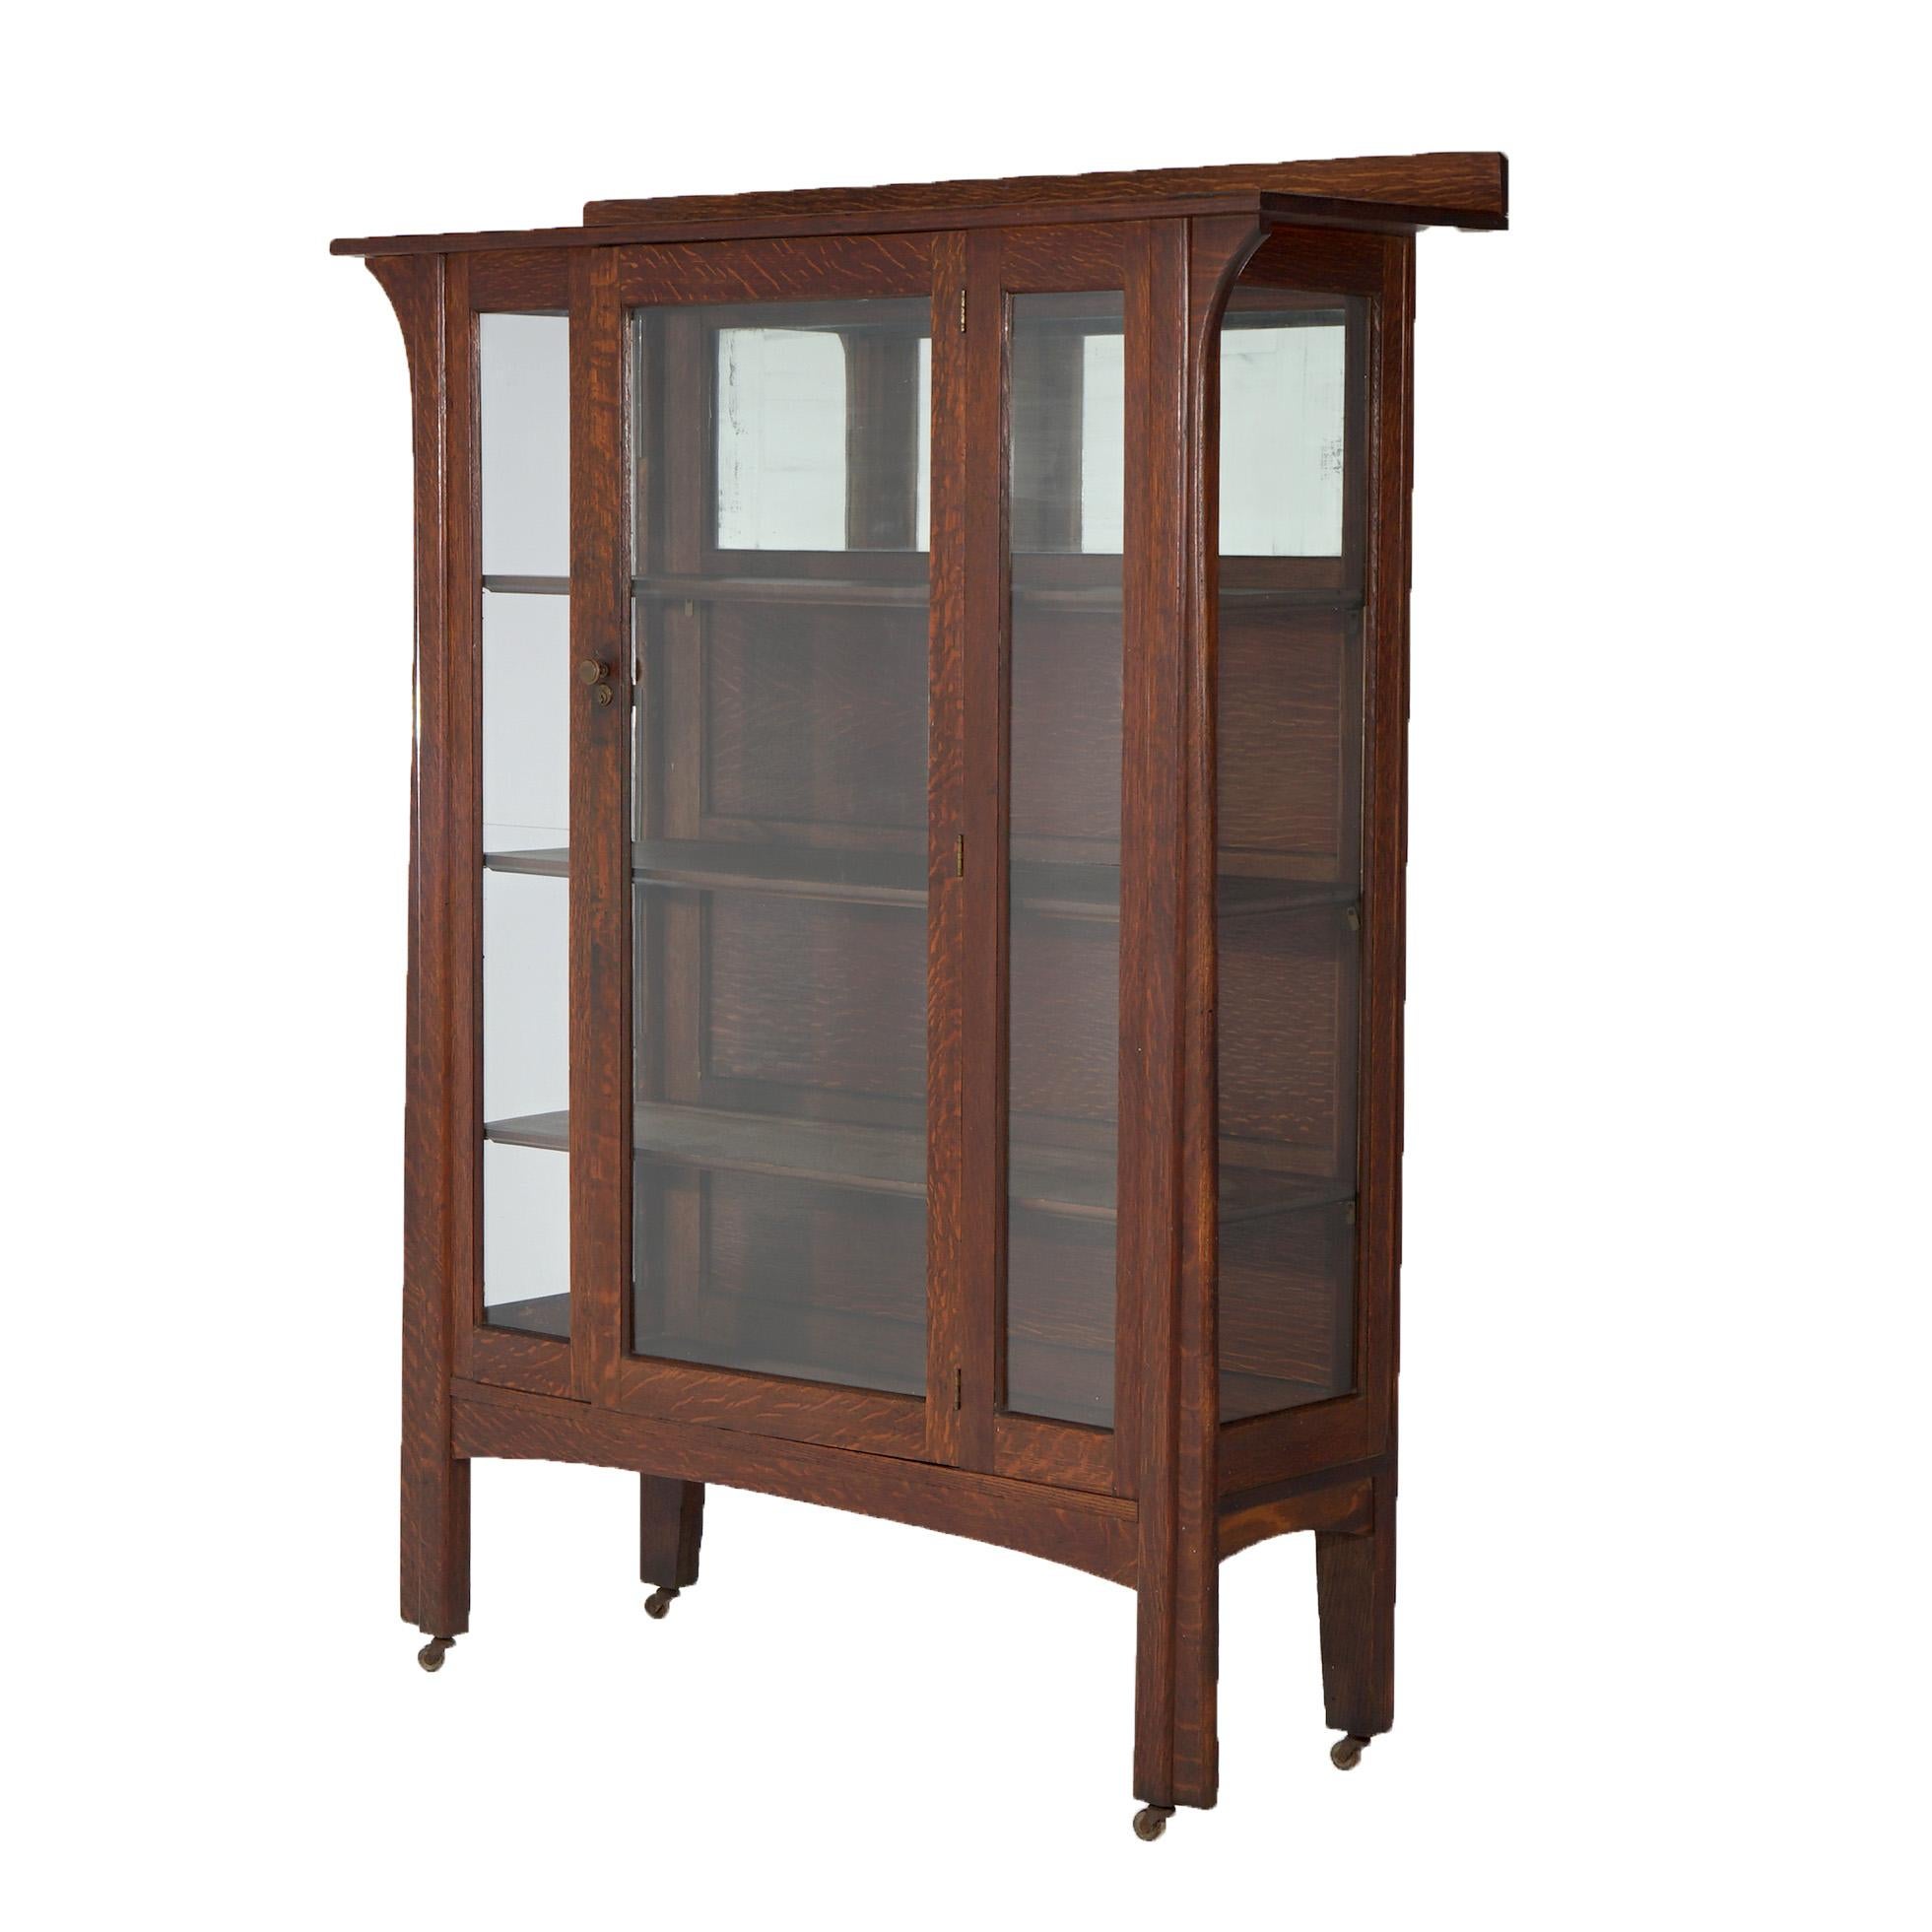 An antique Arts and Crafts Mission china cabinet in the manner of Charles Limbert offers oak construction with double glass doors opening to shelved and mirrored interior, c1910

Measures - 62